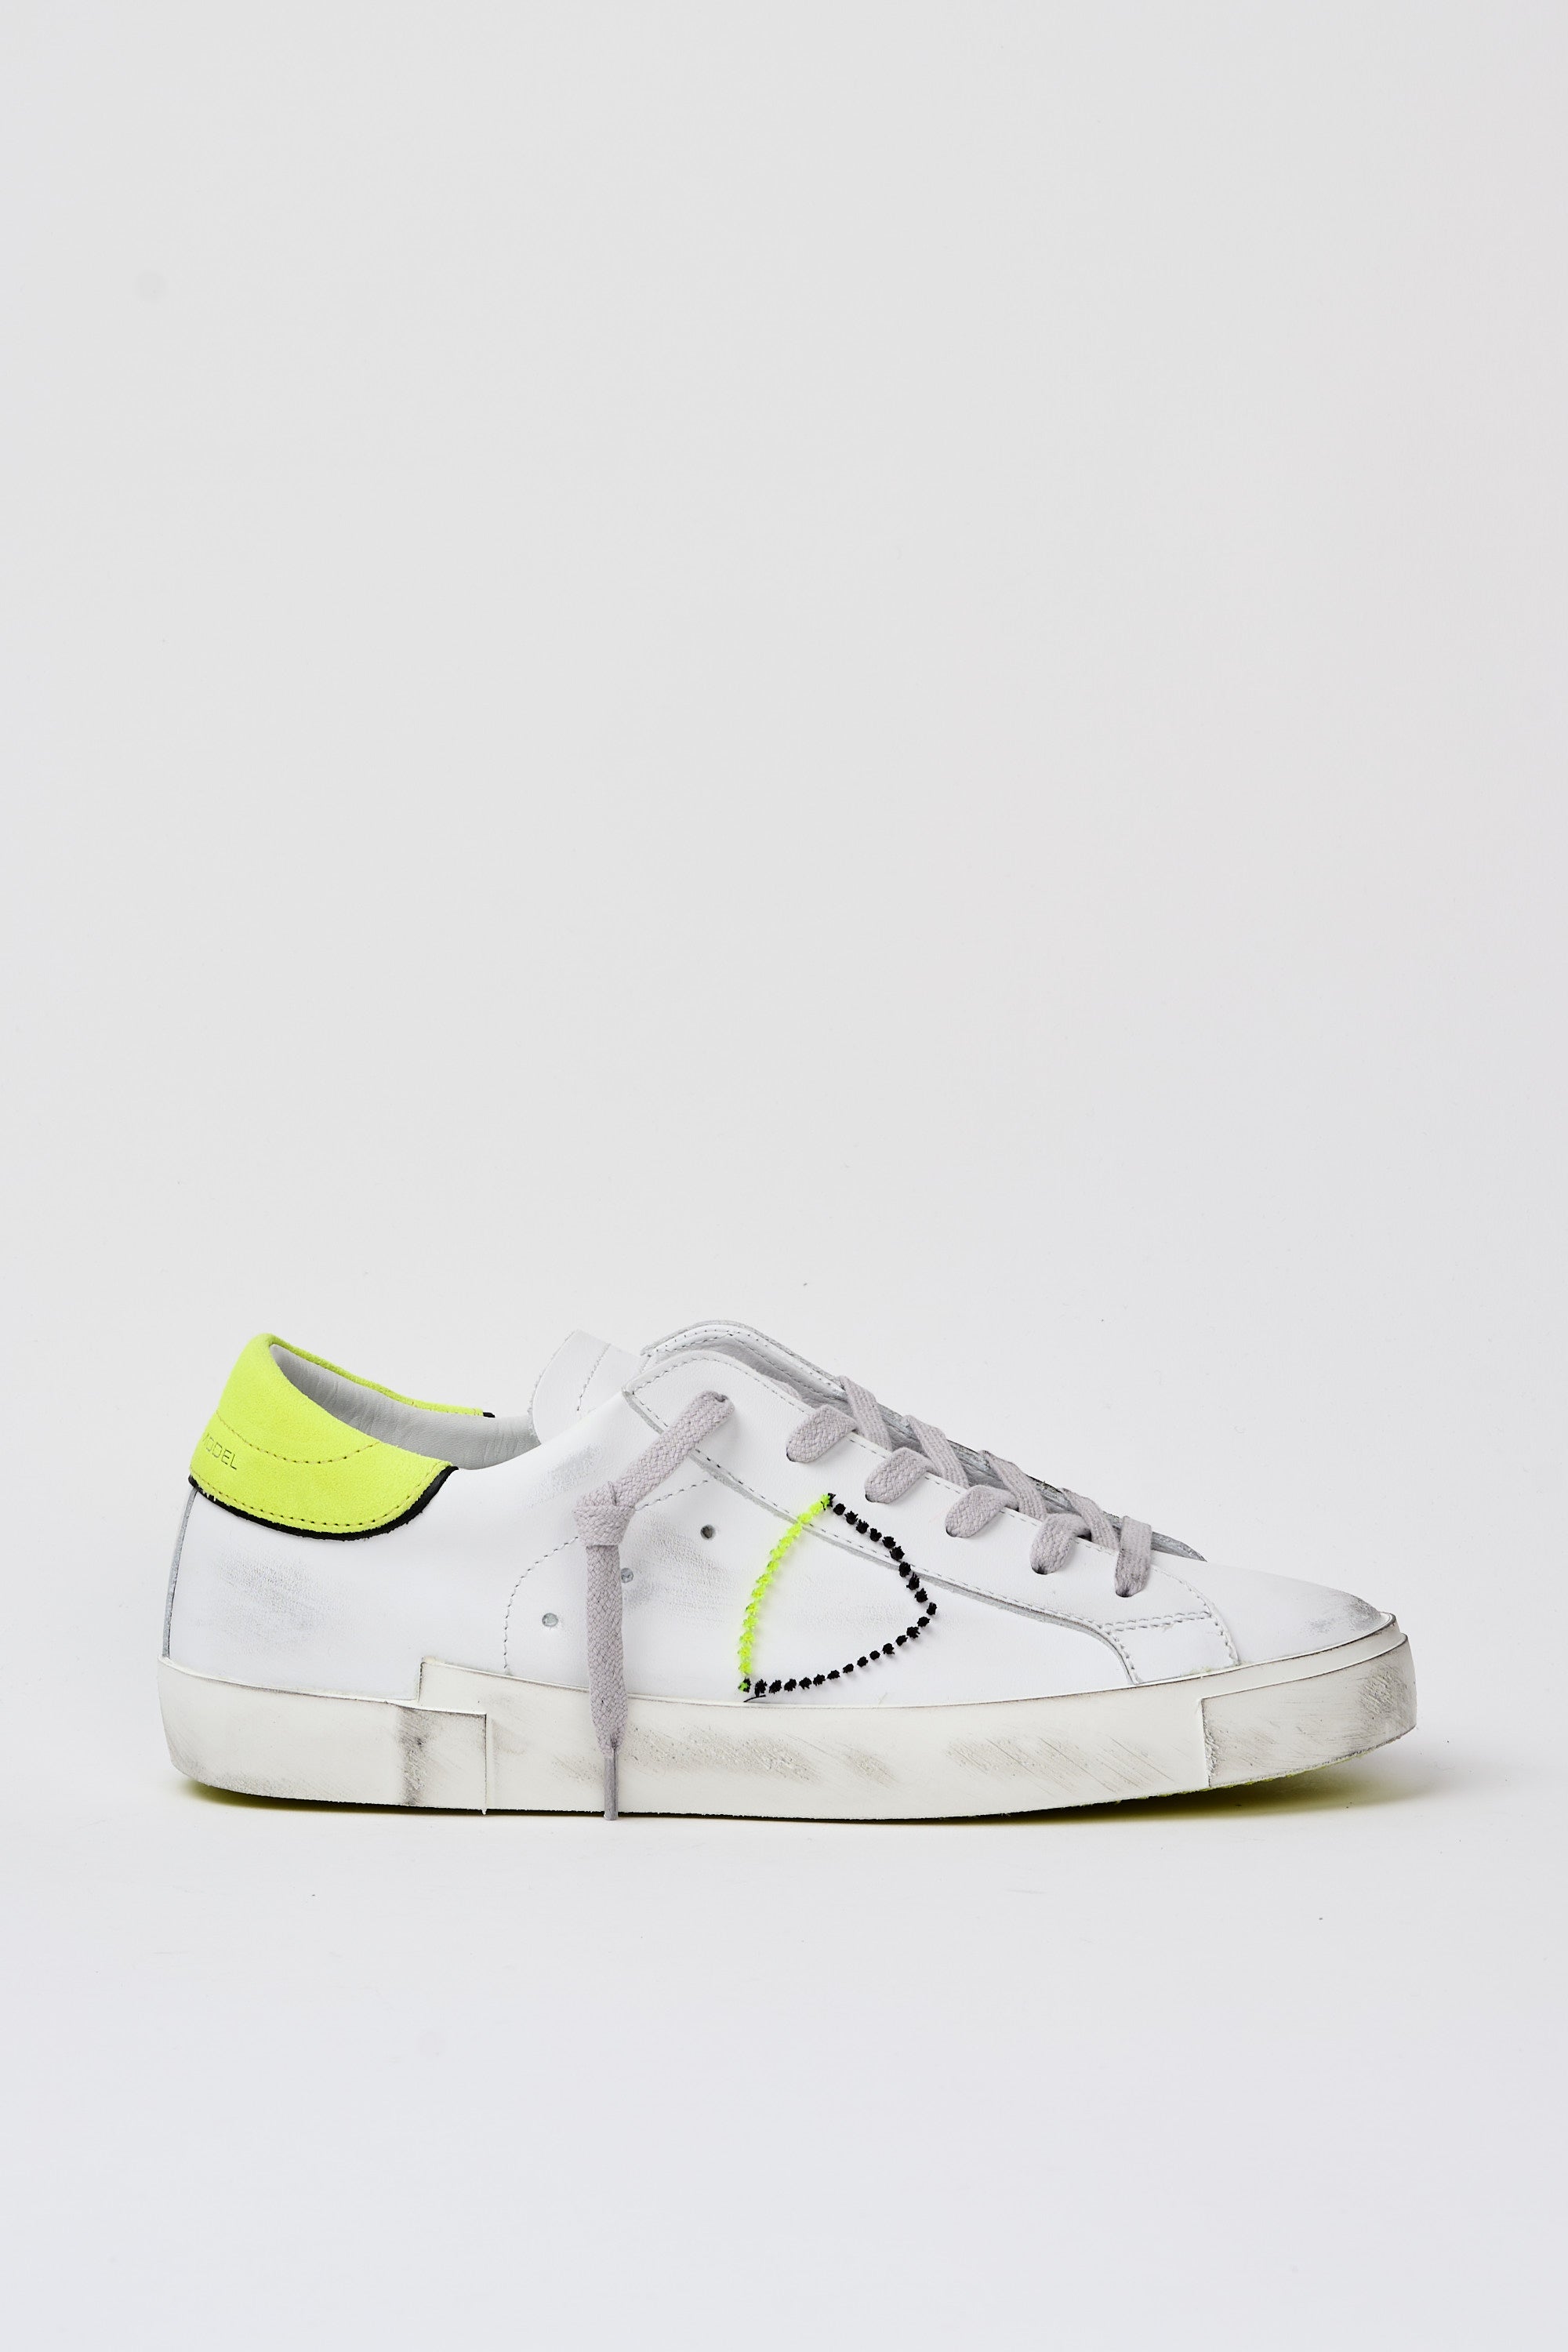 Philippe Model Sneaker Prsx Leather White/Yellow fluo-1